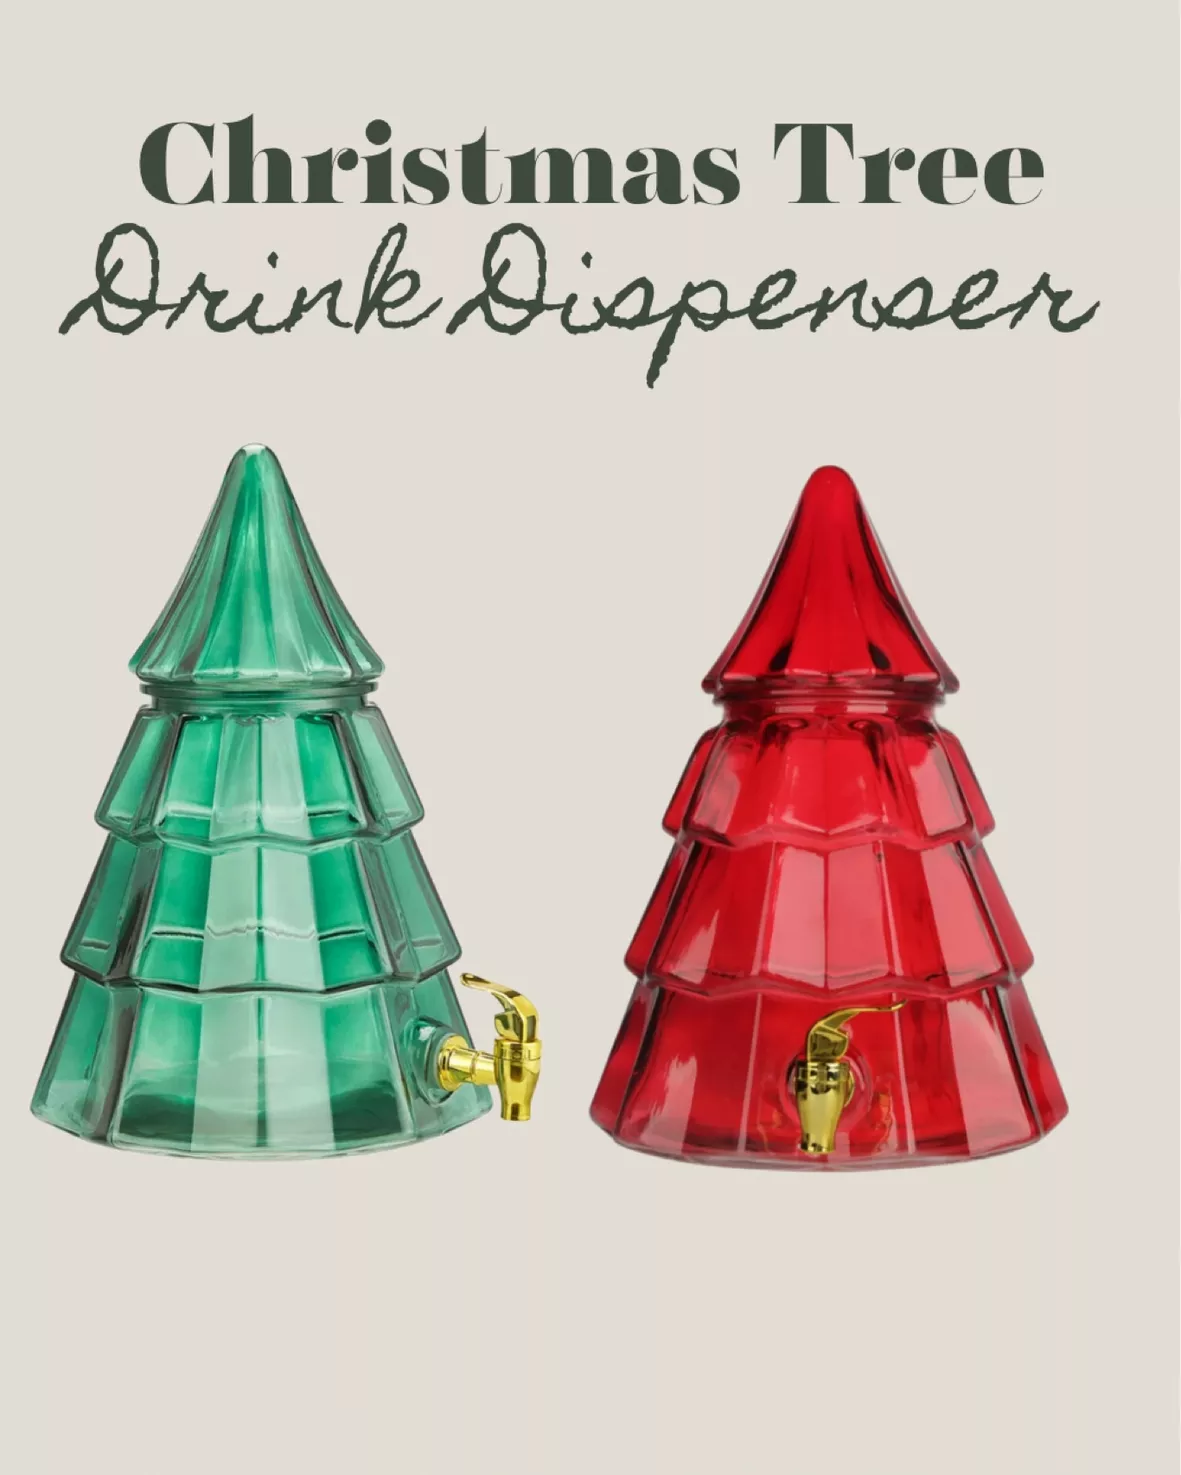 Holiday Time 1.5-Gallon Glass Christmas Tree Drink Dispenser with Lid, Red  